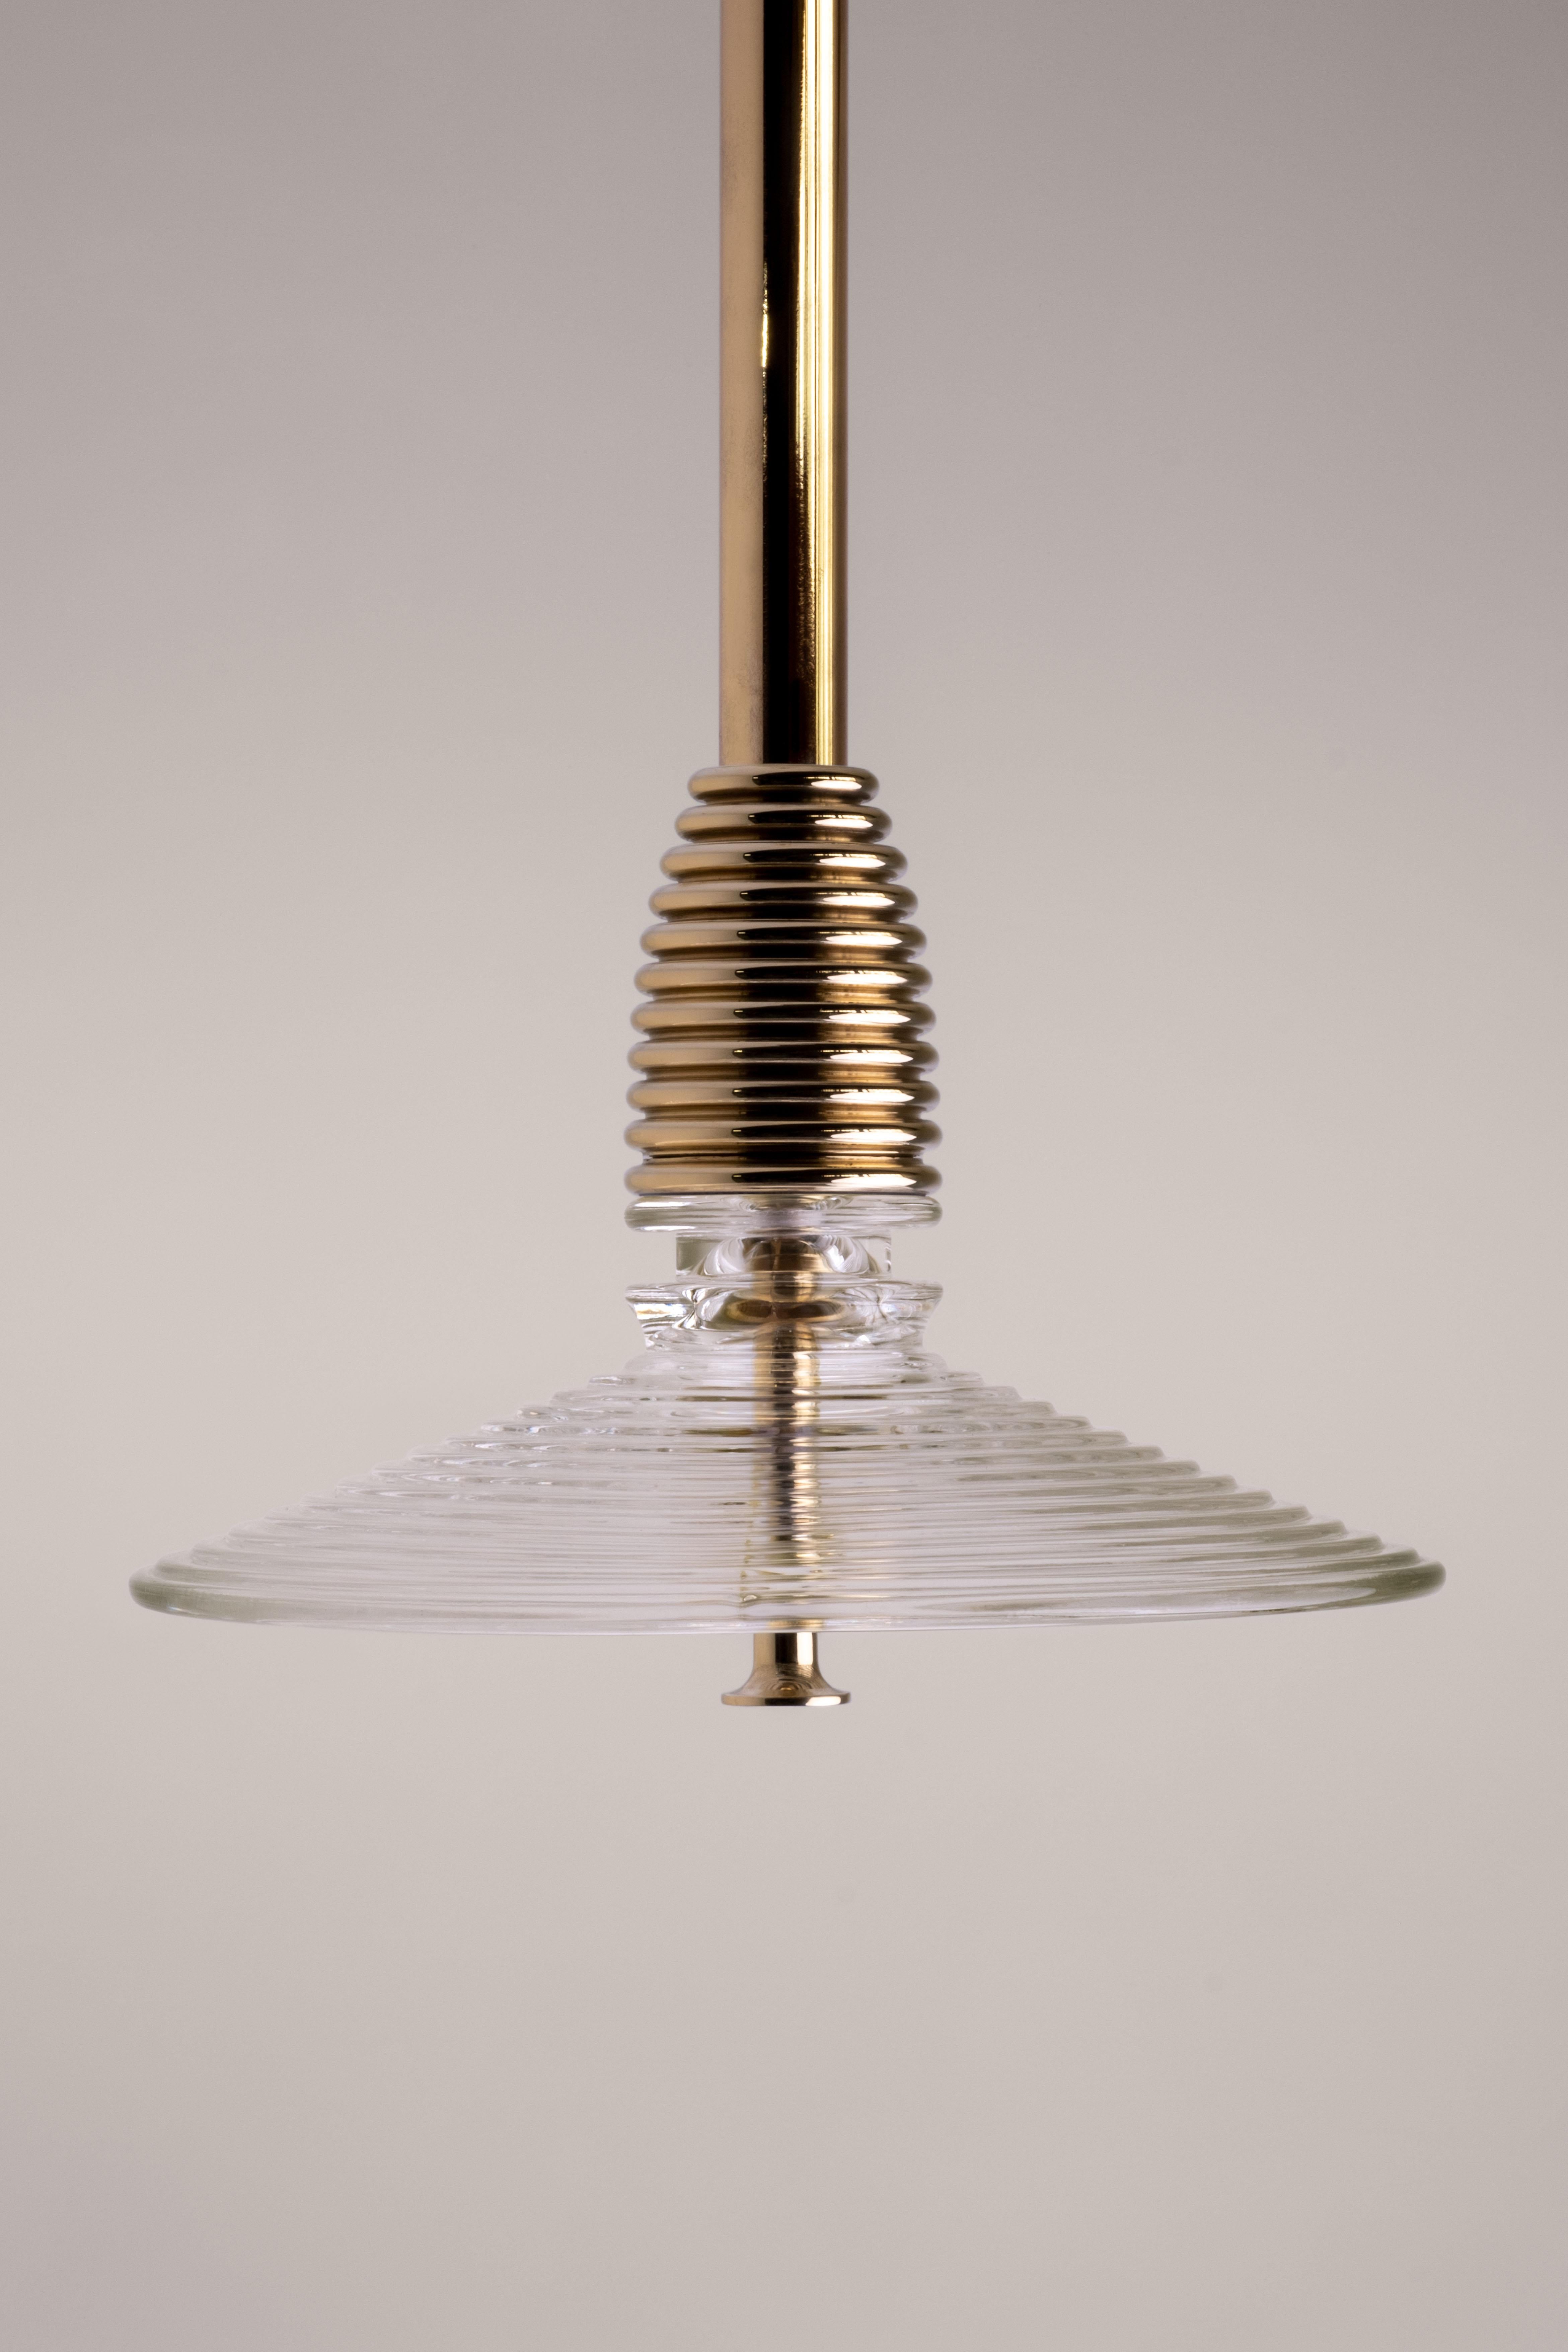 The Insulator 'B' Pendant in dark brass and frosted glass by NOVOCASTRIAN deco For Sale 3